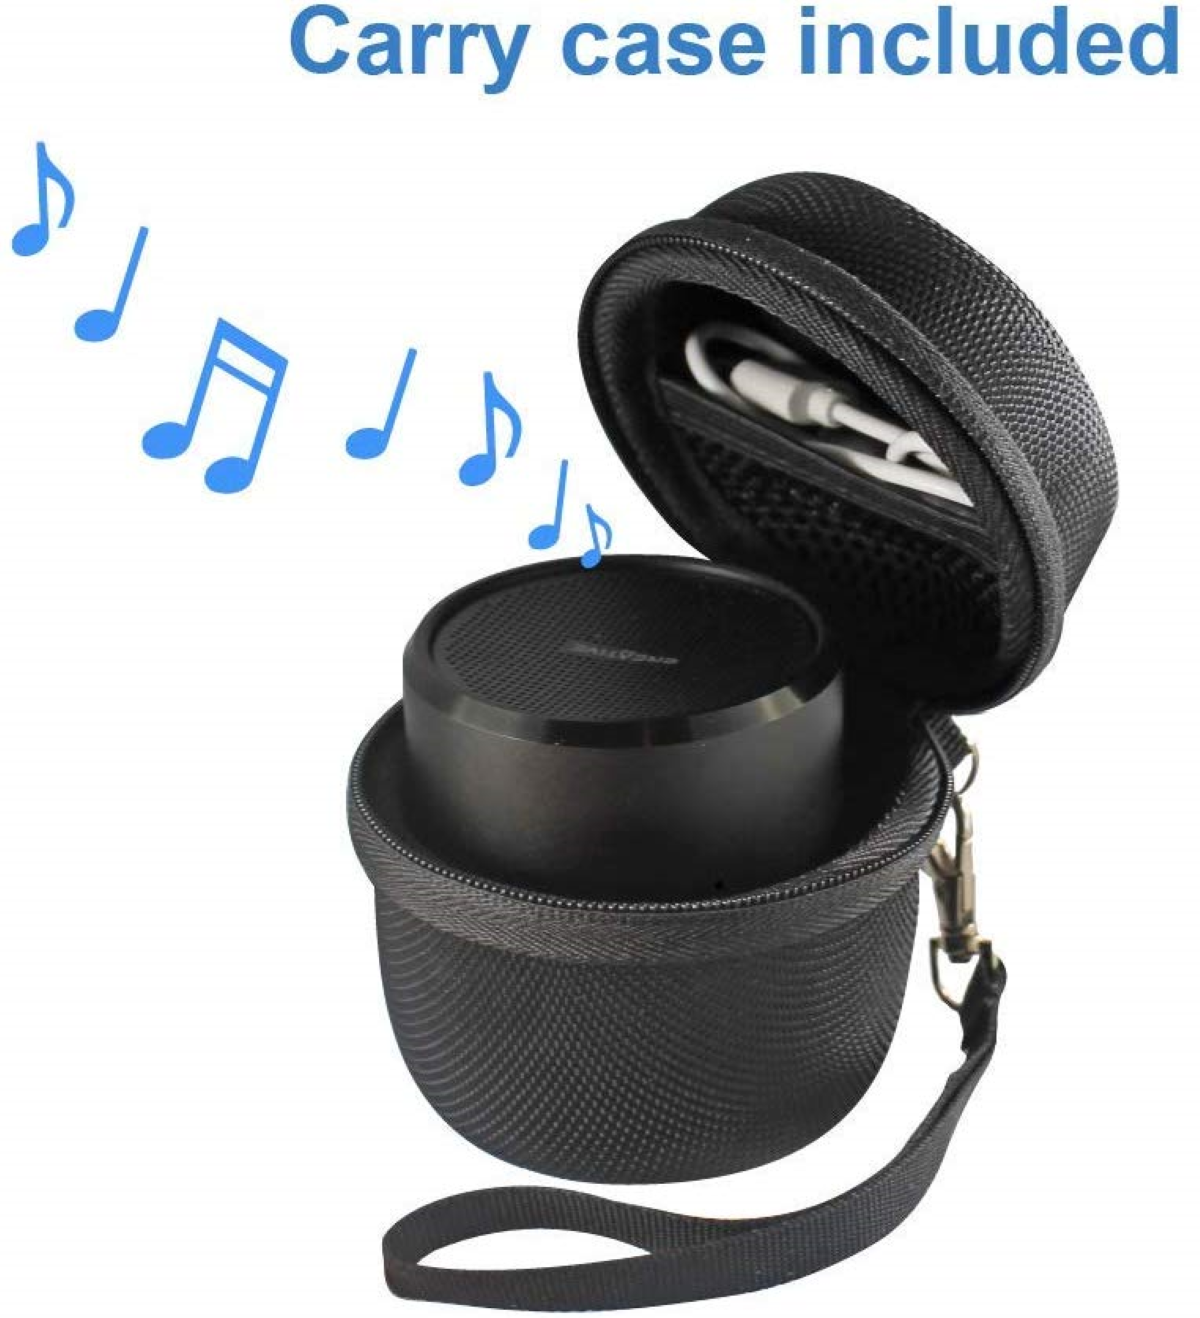 iCalm Speaker - Carrying Case and Power Cable